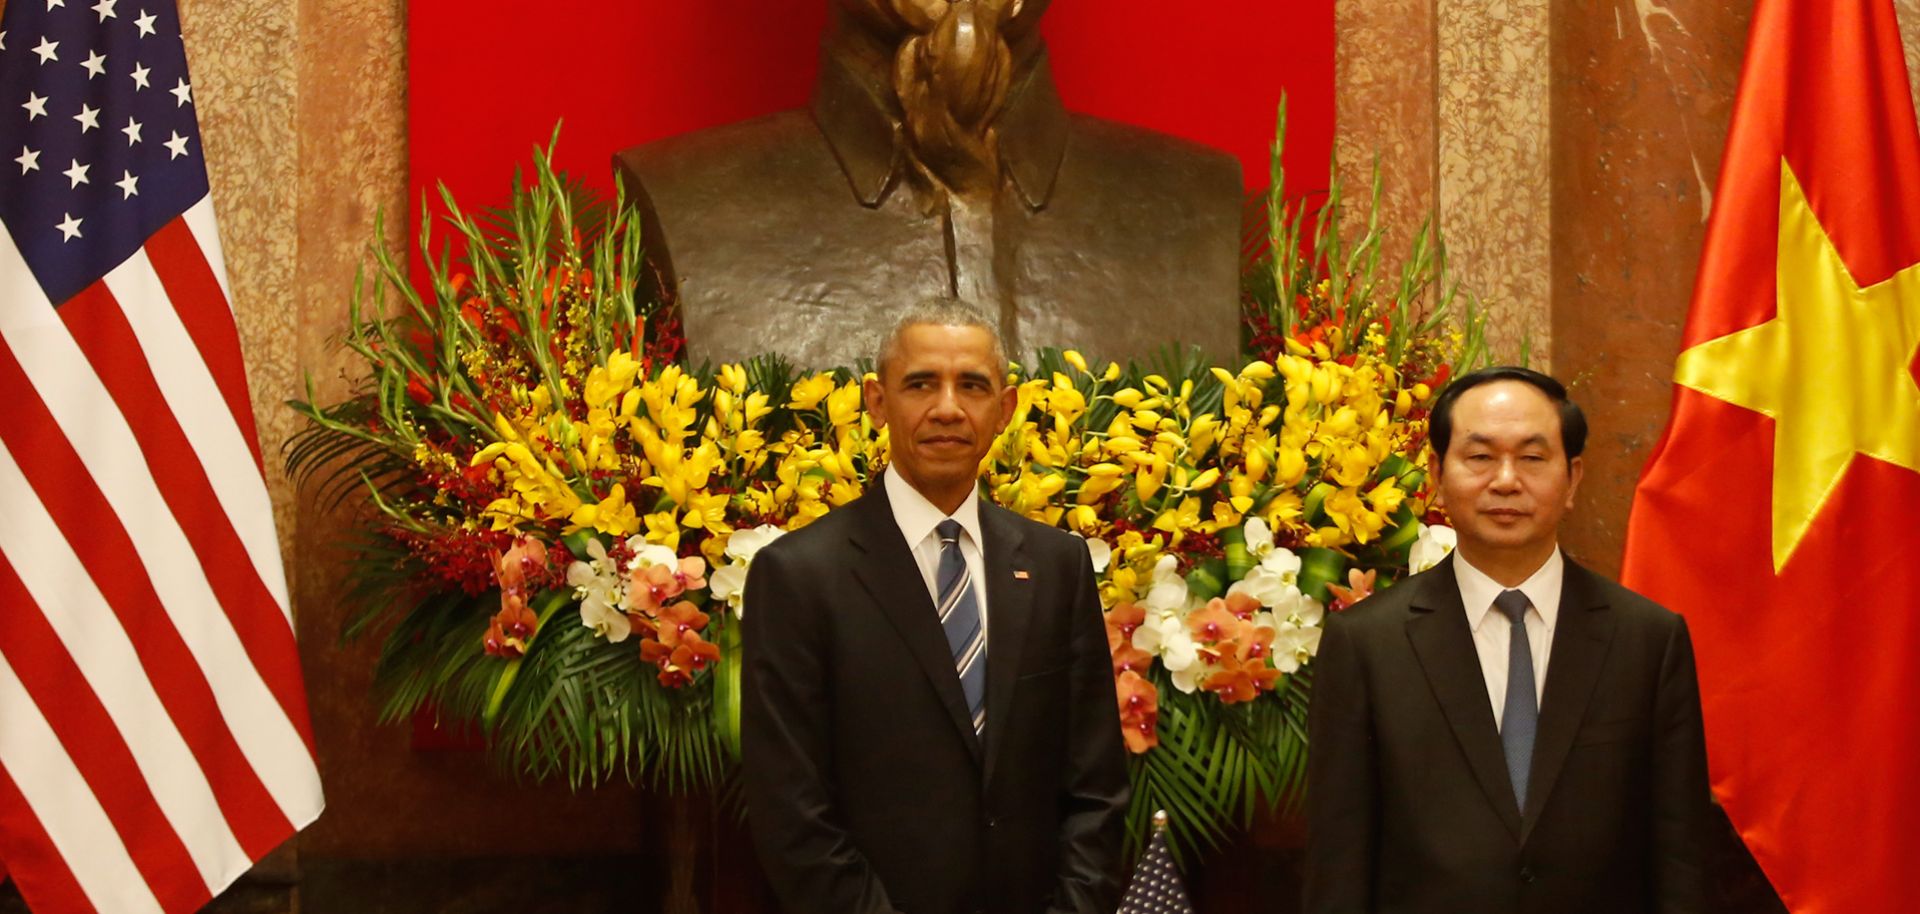 On his first visit to Hanoi, U.S. President Barack Obama announced that the United States would lift its ban on arms sales and transfers to Vietnam.